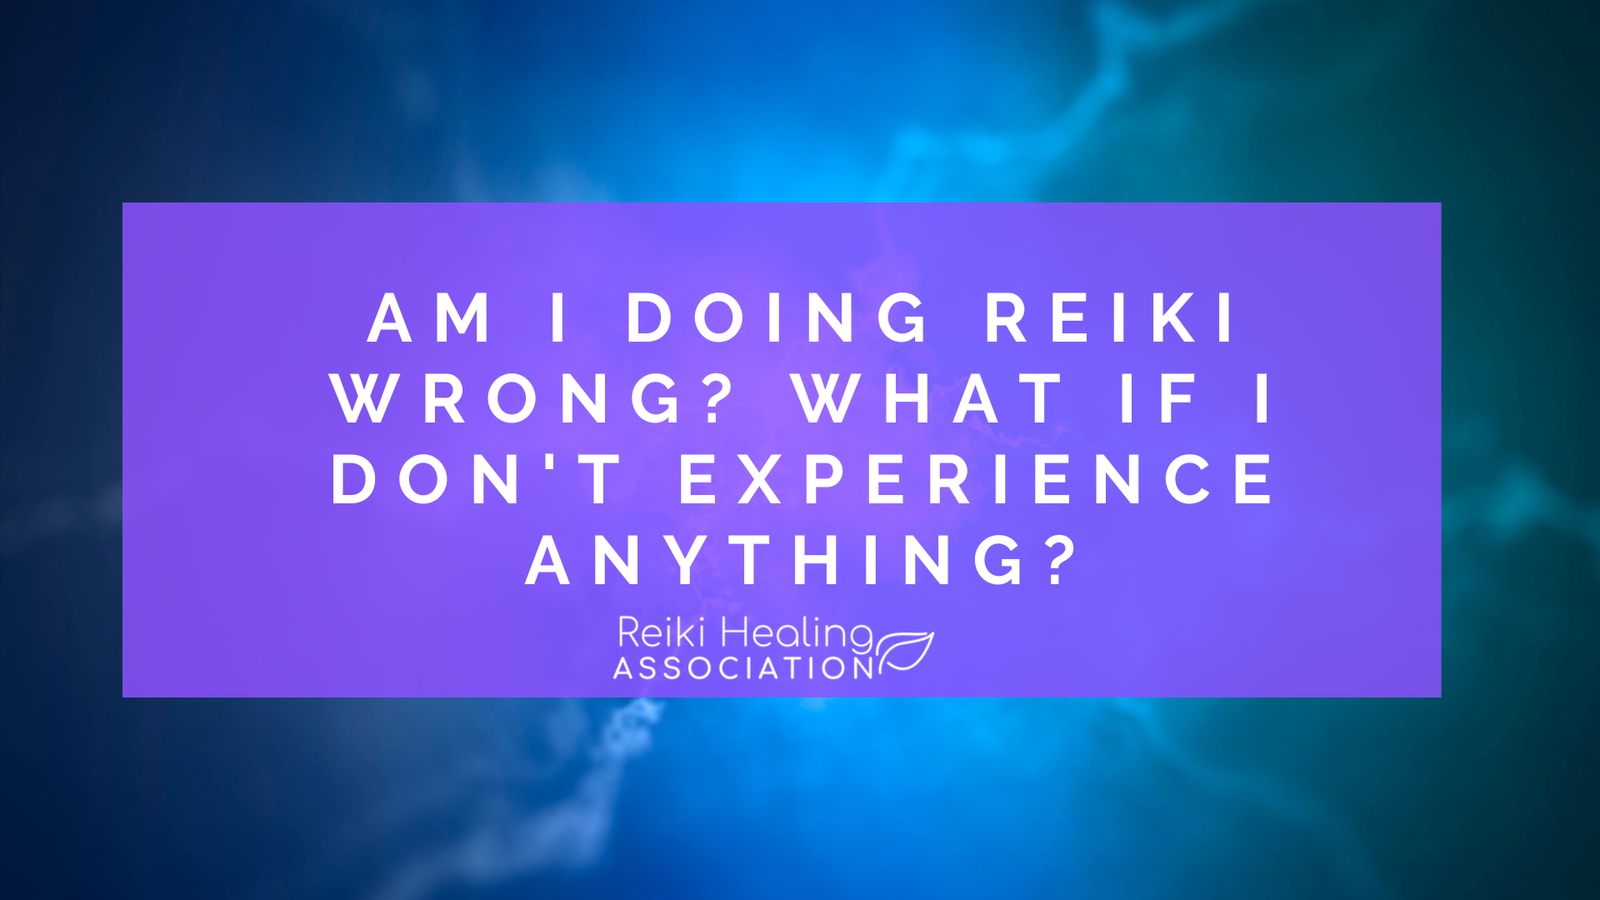 Am I Doing Reiki Wrong? What if I don’t experience anything